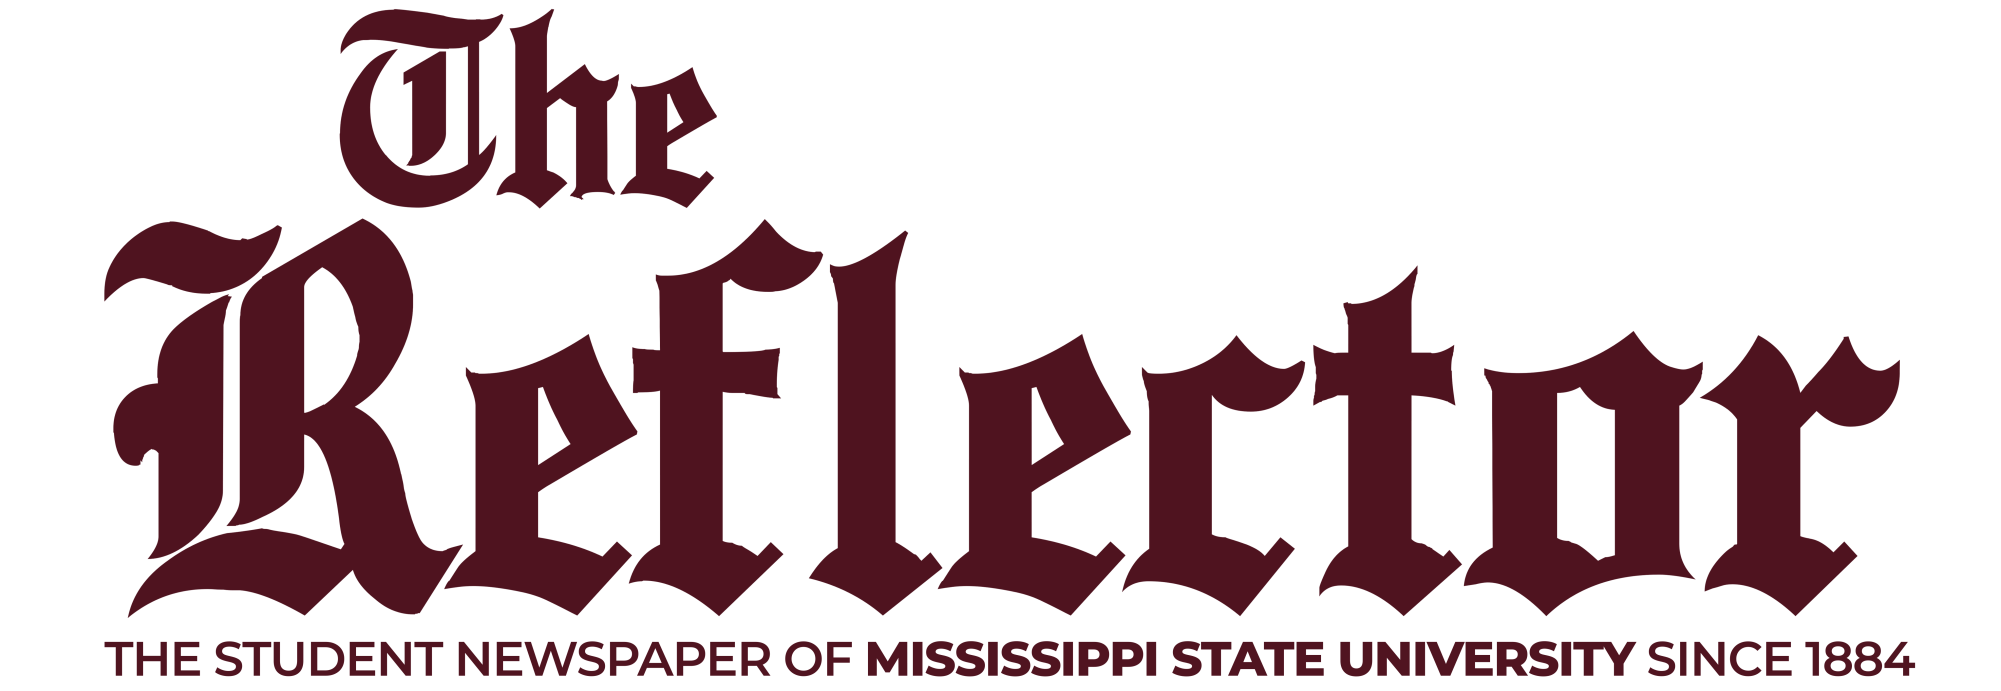 The Student Newspaper of Mississippi State University